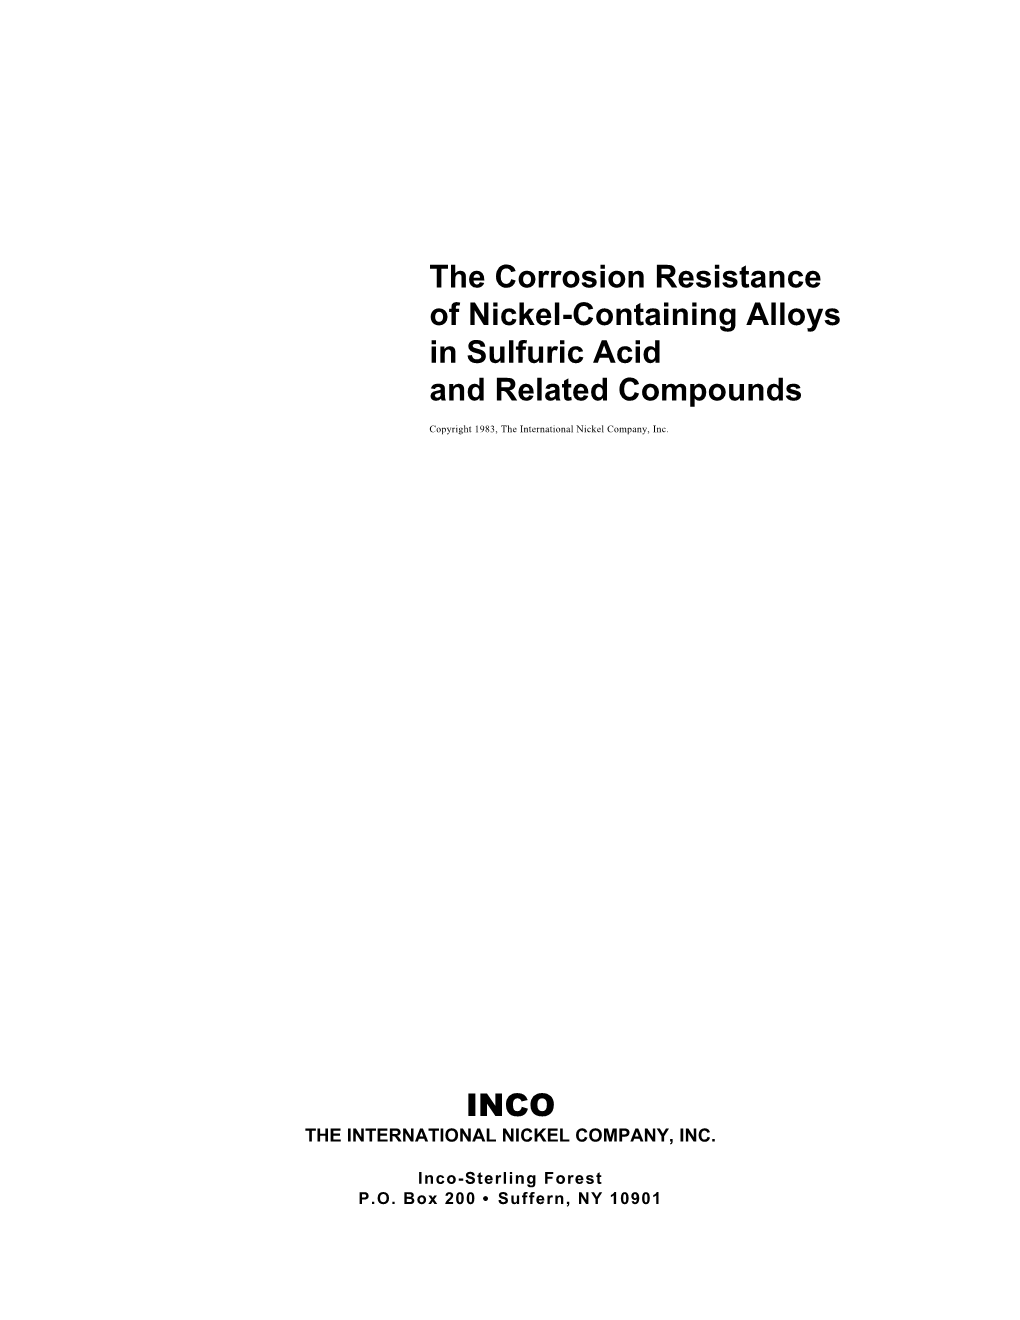 The Corrosion Resistance of Nickel-Containing Alloys in Sulfuric Acid and Related Compounds